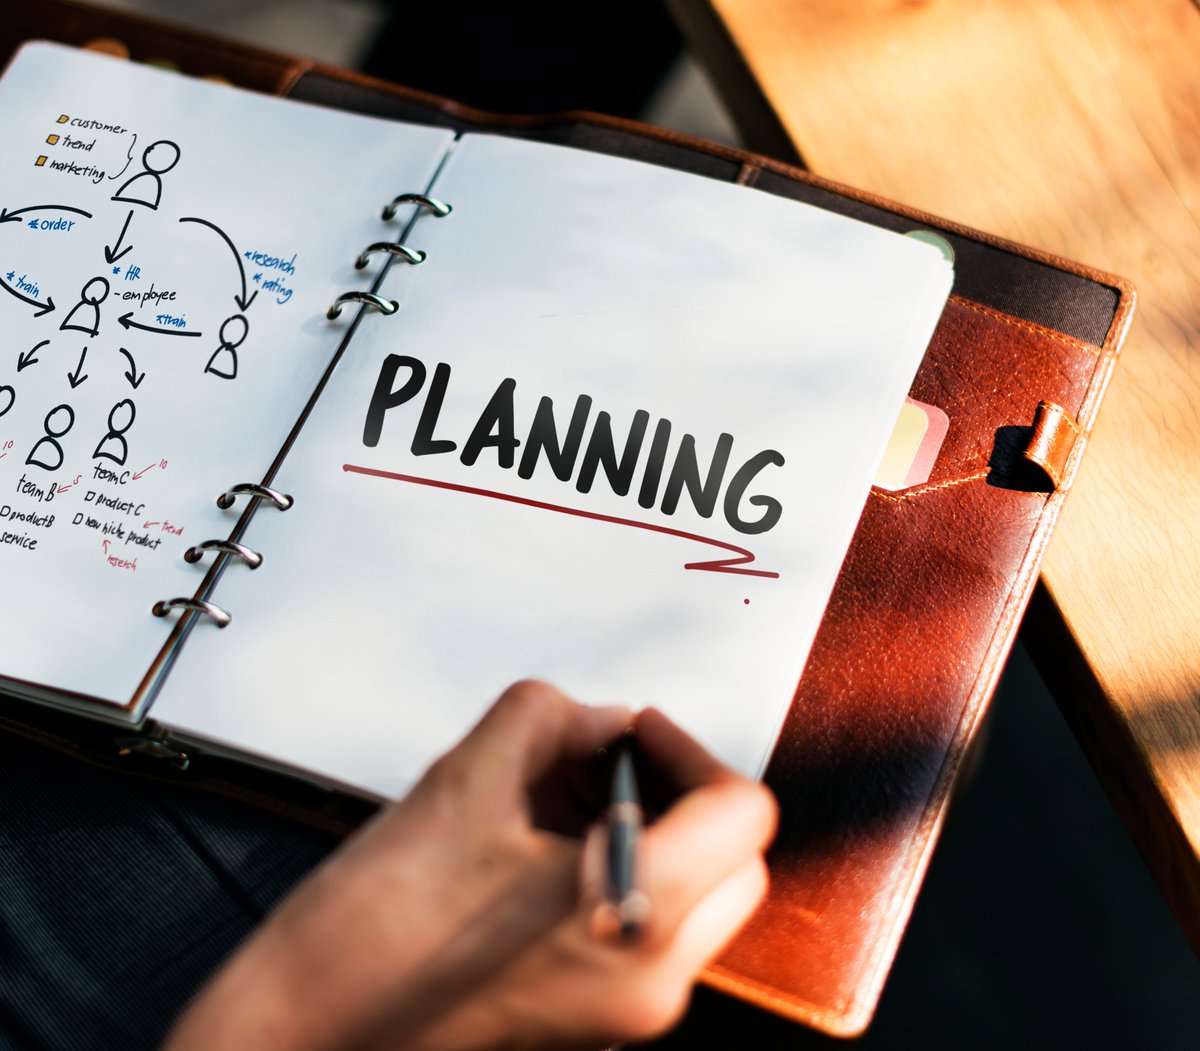 Does your business want to SCENARIO PLAN its future in South Africa? (Unique challenges for sure!)

READ MORE, and chat to me here: jeanpierremurraykline.co.za/futurethinking…

#scenarioplanning #business #futureplanning #challenges #southafrica